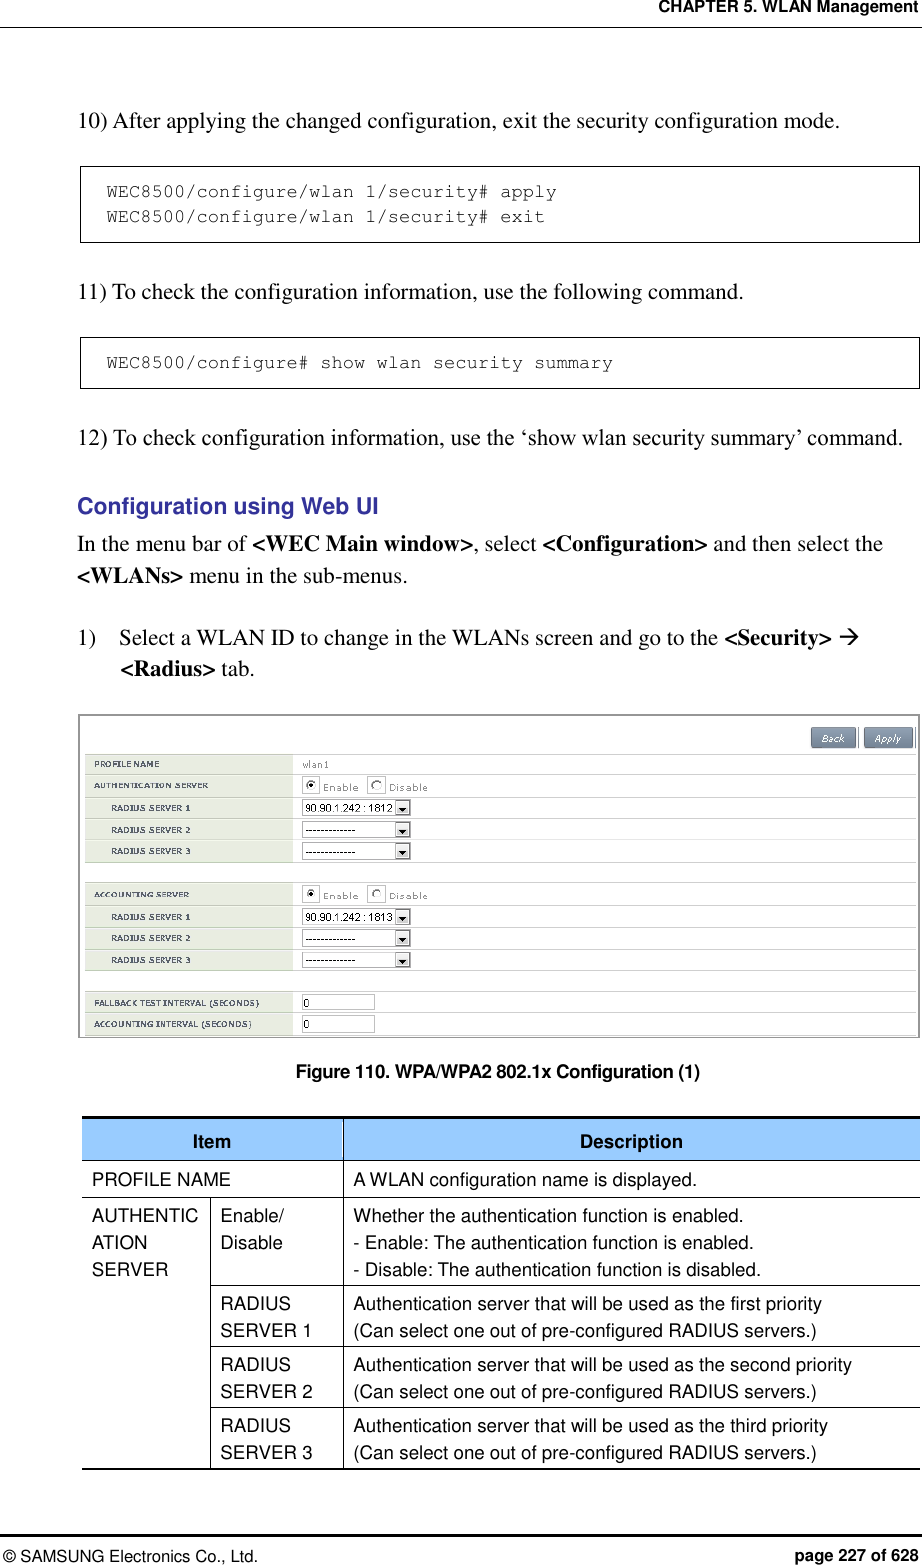 CHAPTER 5. WLAN Management ©  SAMSUNG Electronics Co., Ltd.  page 227 of 628 10) After applying the changed configuration, exit the security configuration mode.  WEC8500/configure/wlan 1/security# apply WEC8500/configure/wlan 1/security# exit  11) To check the configuration information, use the following command.  WEC8500/configure# show wlan security summary  12) To check configuration information, use the ‘show wlan security summary’ command.  Configuration using Web UI In the menu bar of &lt;WEC Main window&gt;, select &lt;Configuration&gt; and then select the &lt;WLANs&gt; menu in the sub-menus.    1)    Select a WLAN ID to change in the WLANs screen and go to the &lt;Security&gt;  &lt;Radius&gt; tab.  Figure 110. WPA/WPA2 802.1x Configuration (1)  Item Description PROFILE NAME A WLAN configuration name is displayed. AUTHENTICATION SERVER Enable/ Disable Whether the authentication function is enabled. - Enable: The authentication function is enabled. - Disable: The authentication function is disabled. RADIUS SERVER 1 Authentication server that will be used as the first priority (Can select one out of pre-configured RADIUS servers.) RADIUS SERVER 2 Authentication server that will be used as the second priority (Can select one out of pre-configured RADIUS servers.) RADIUS SERVER 3 Authentication server that will be used as the third priority (Can select one out of pre-configured RADIUS servers.) 